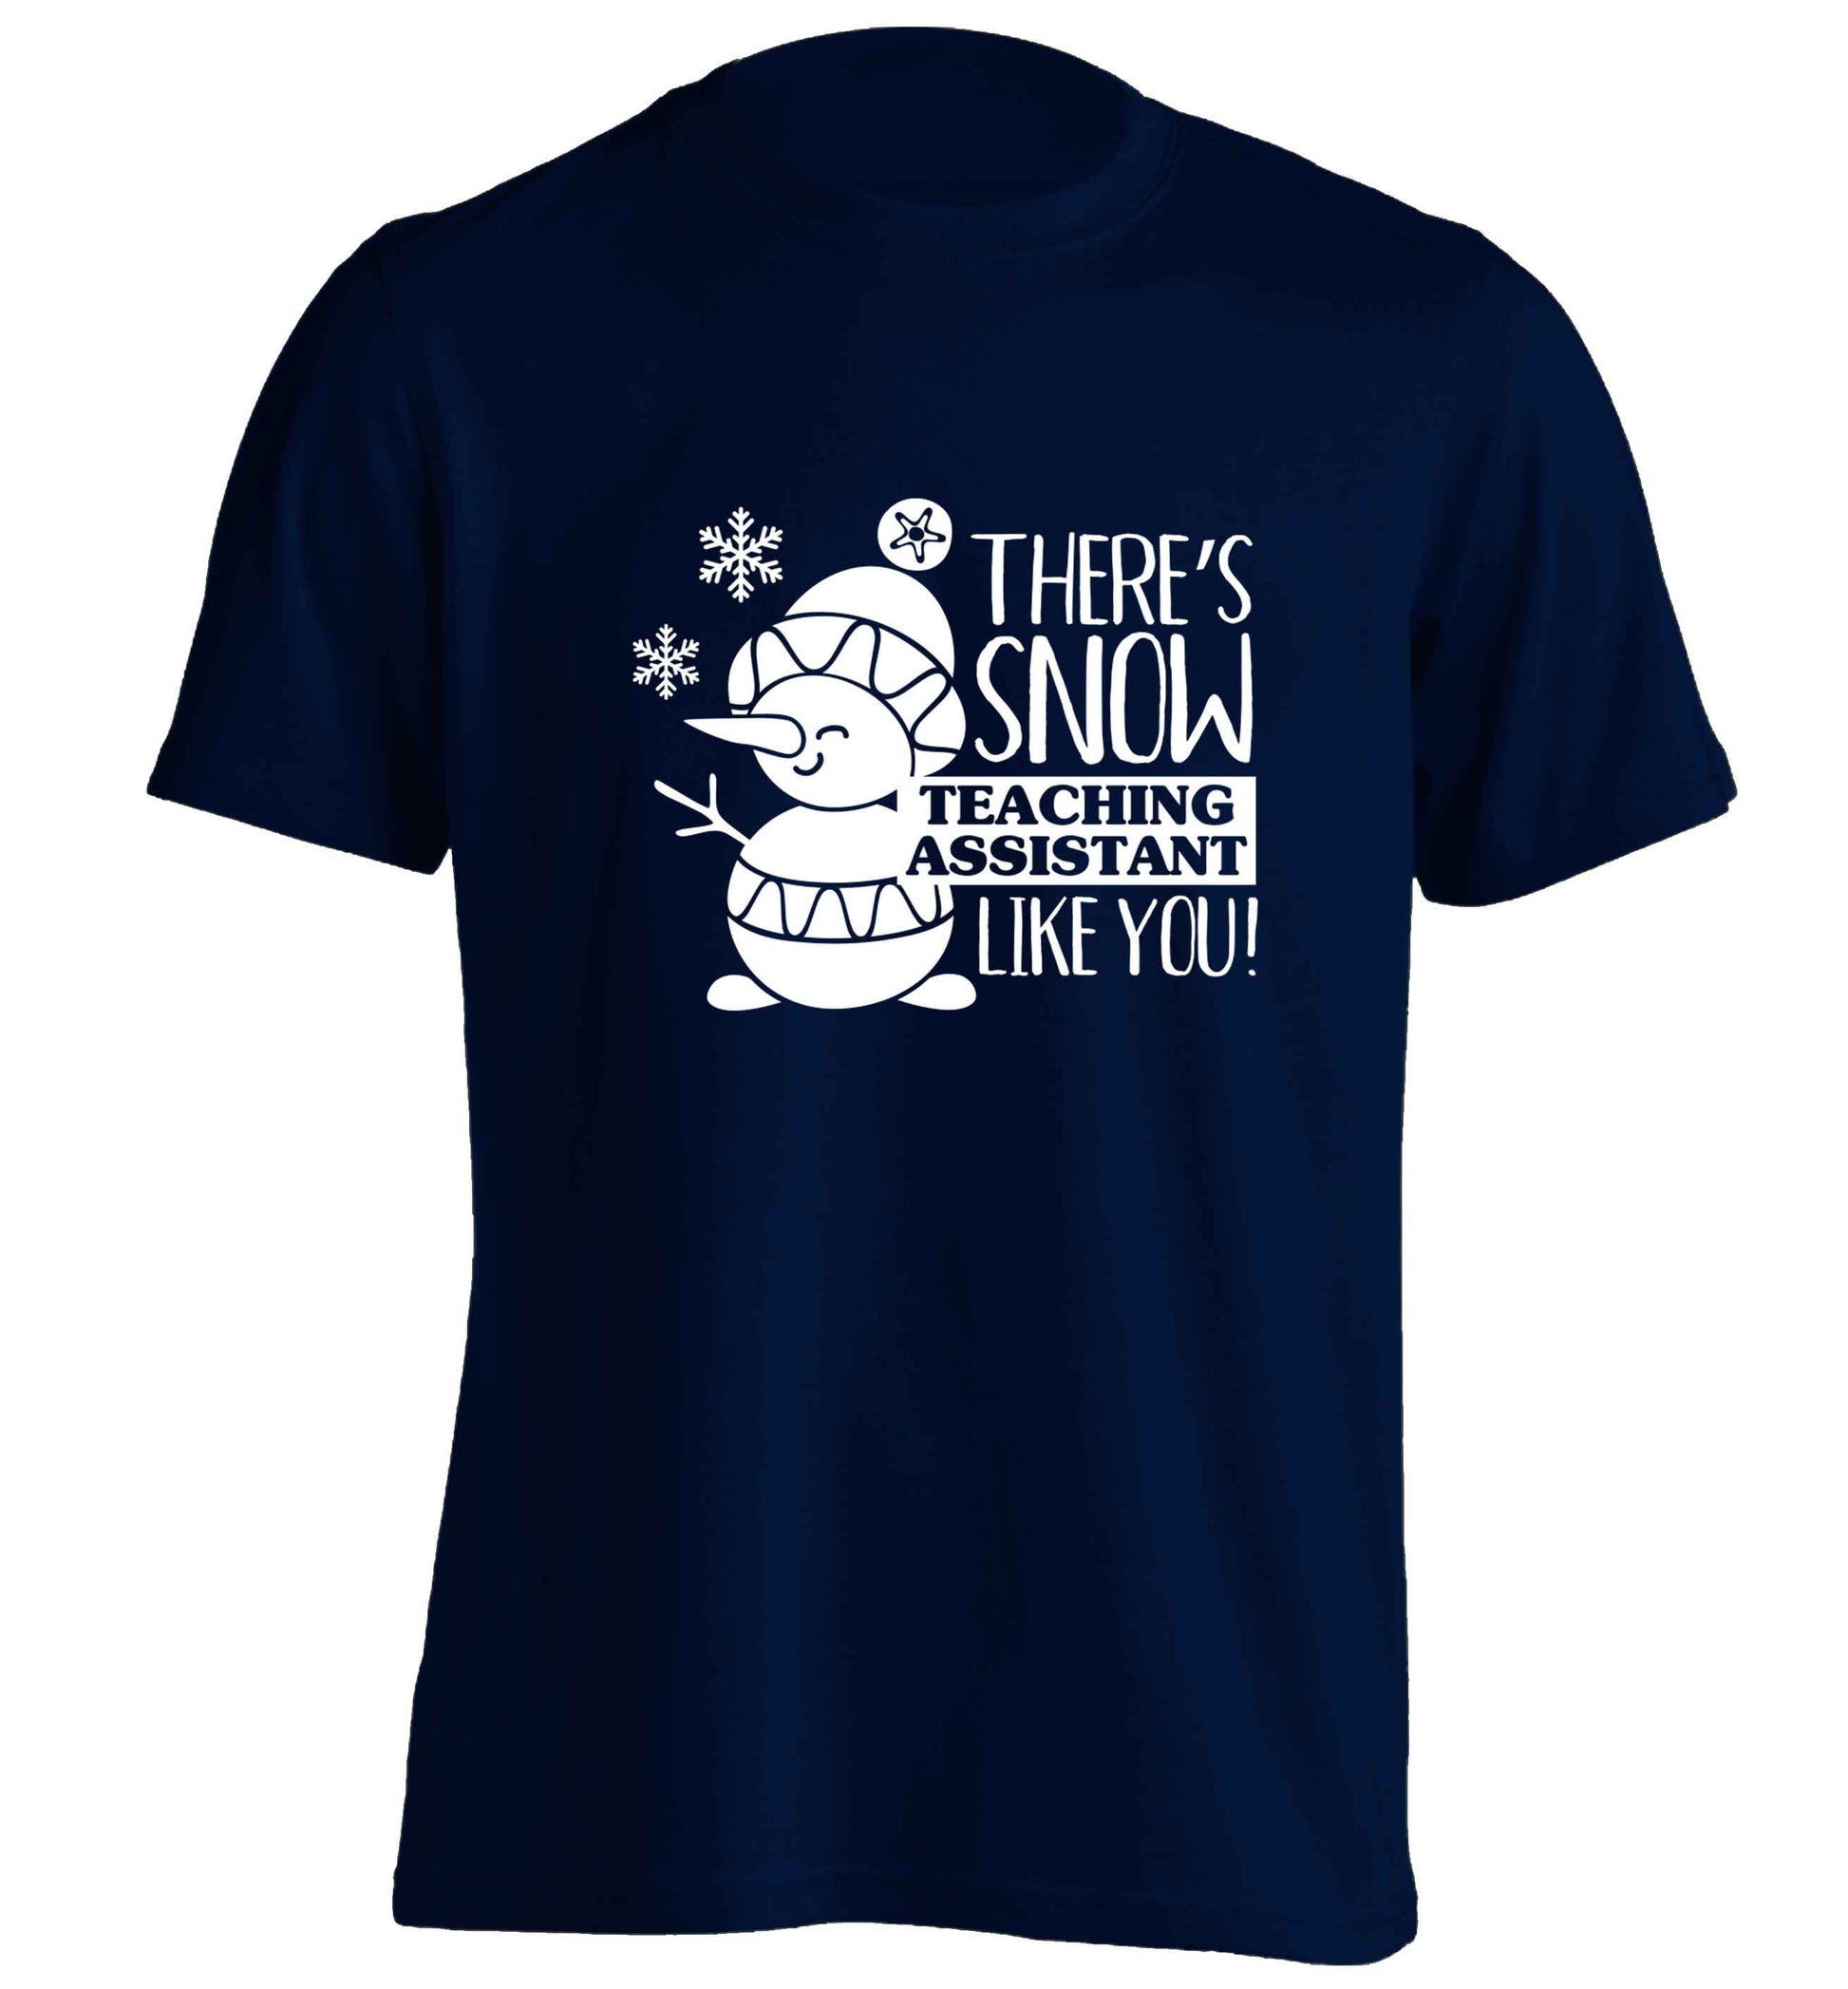 There's snow teaching assistant like you adults unisex navy Tshirt 2XL